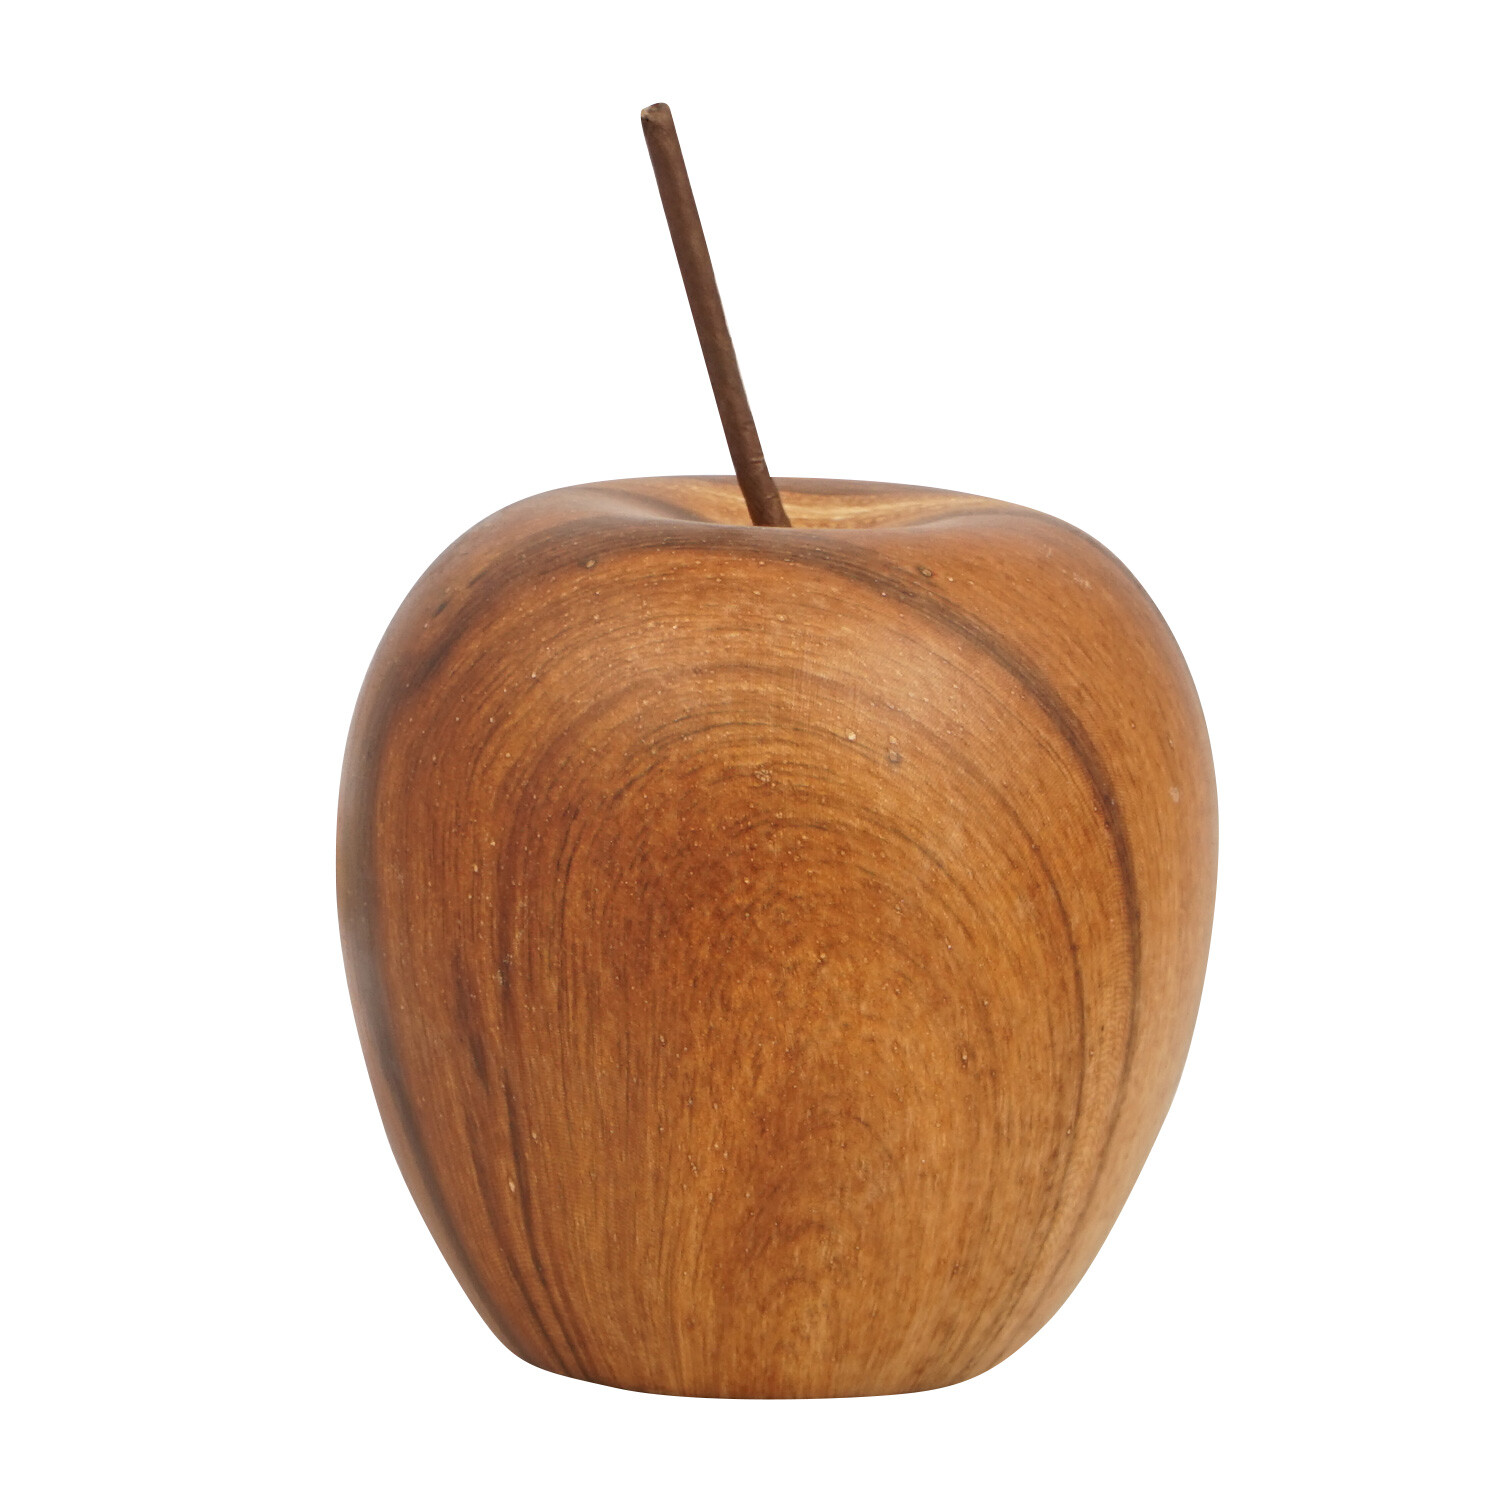 Wooden Effect Fruit Ornament - Brown Image 2